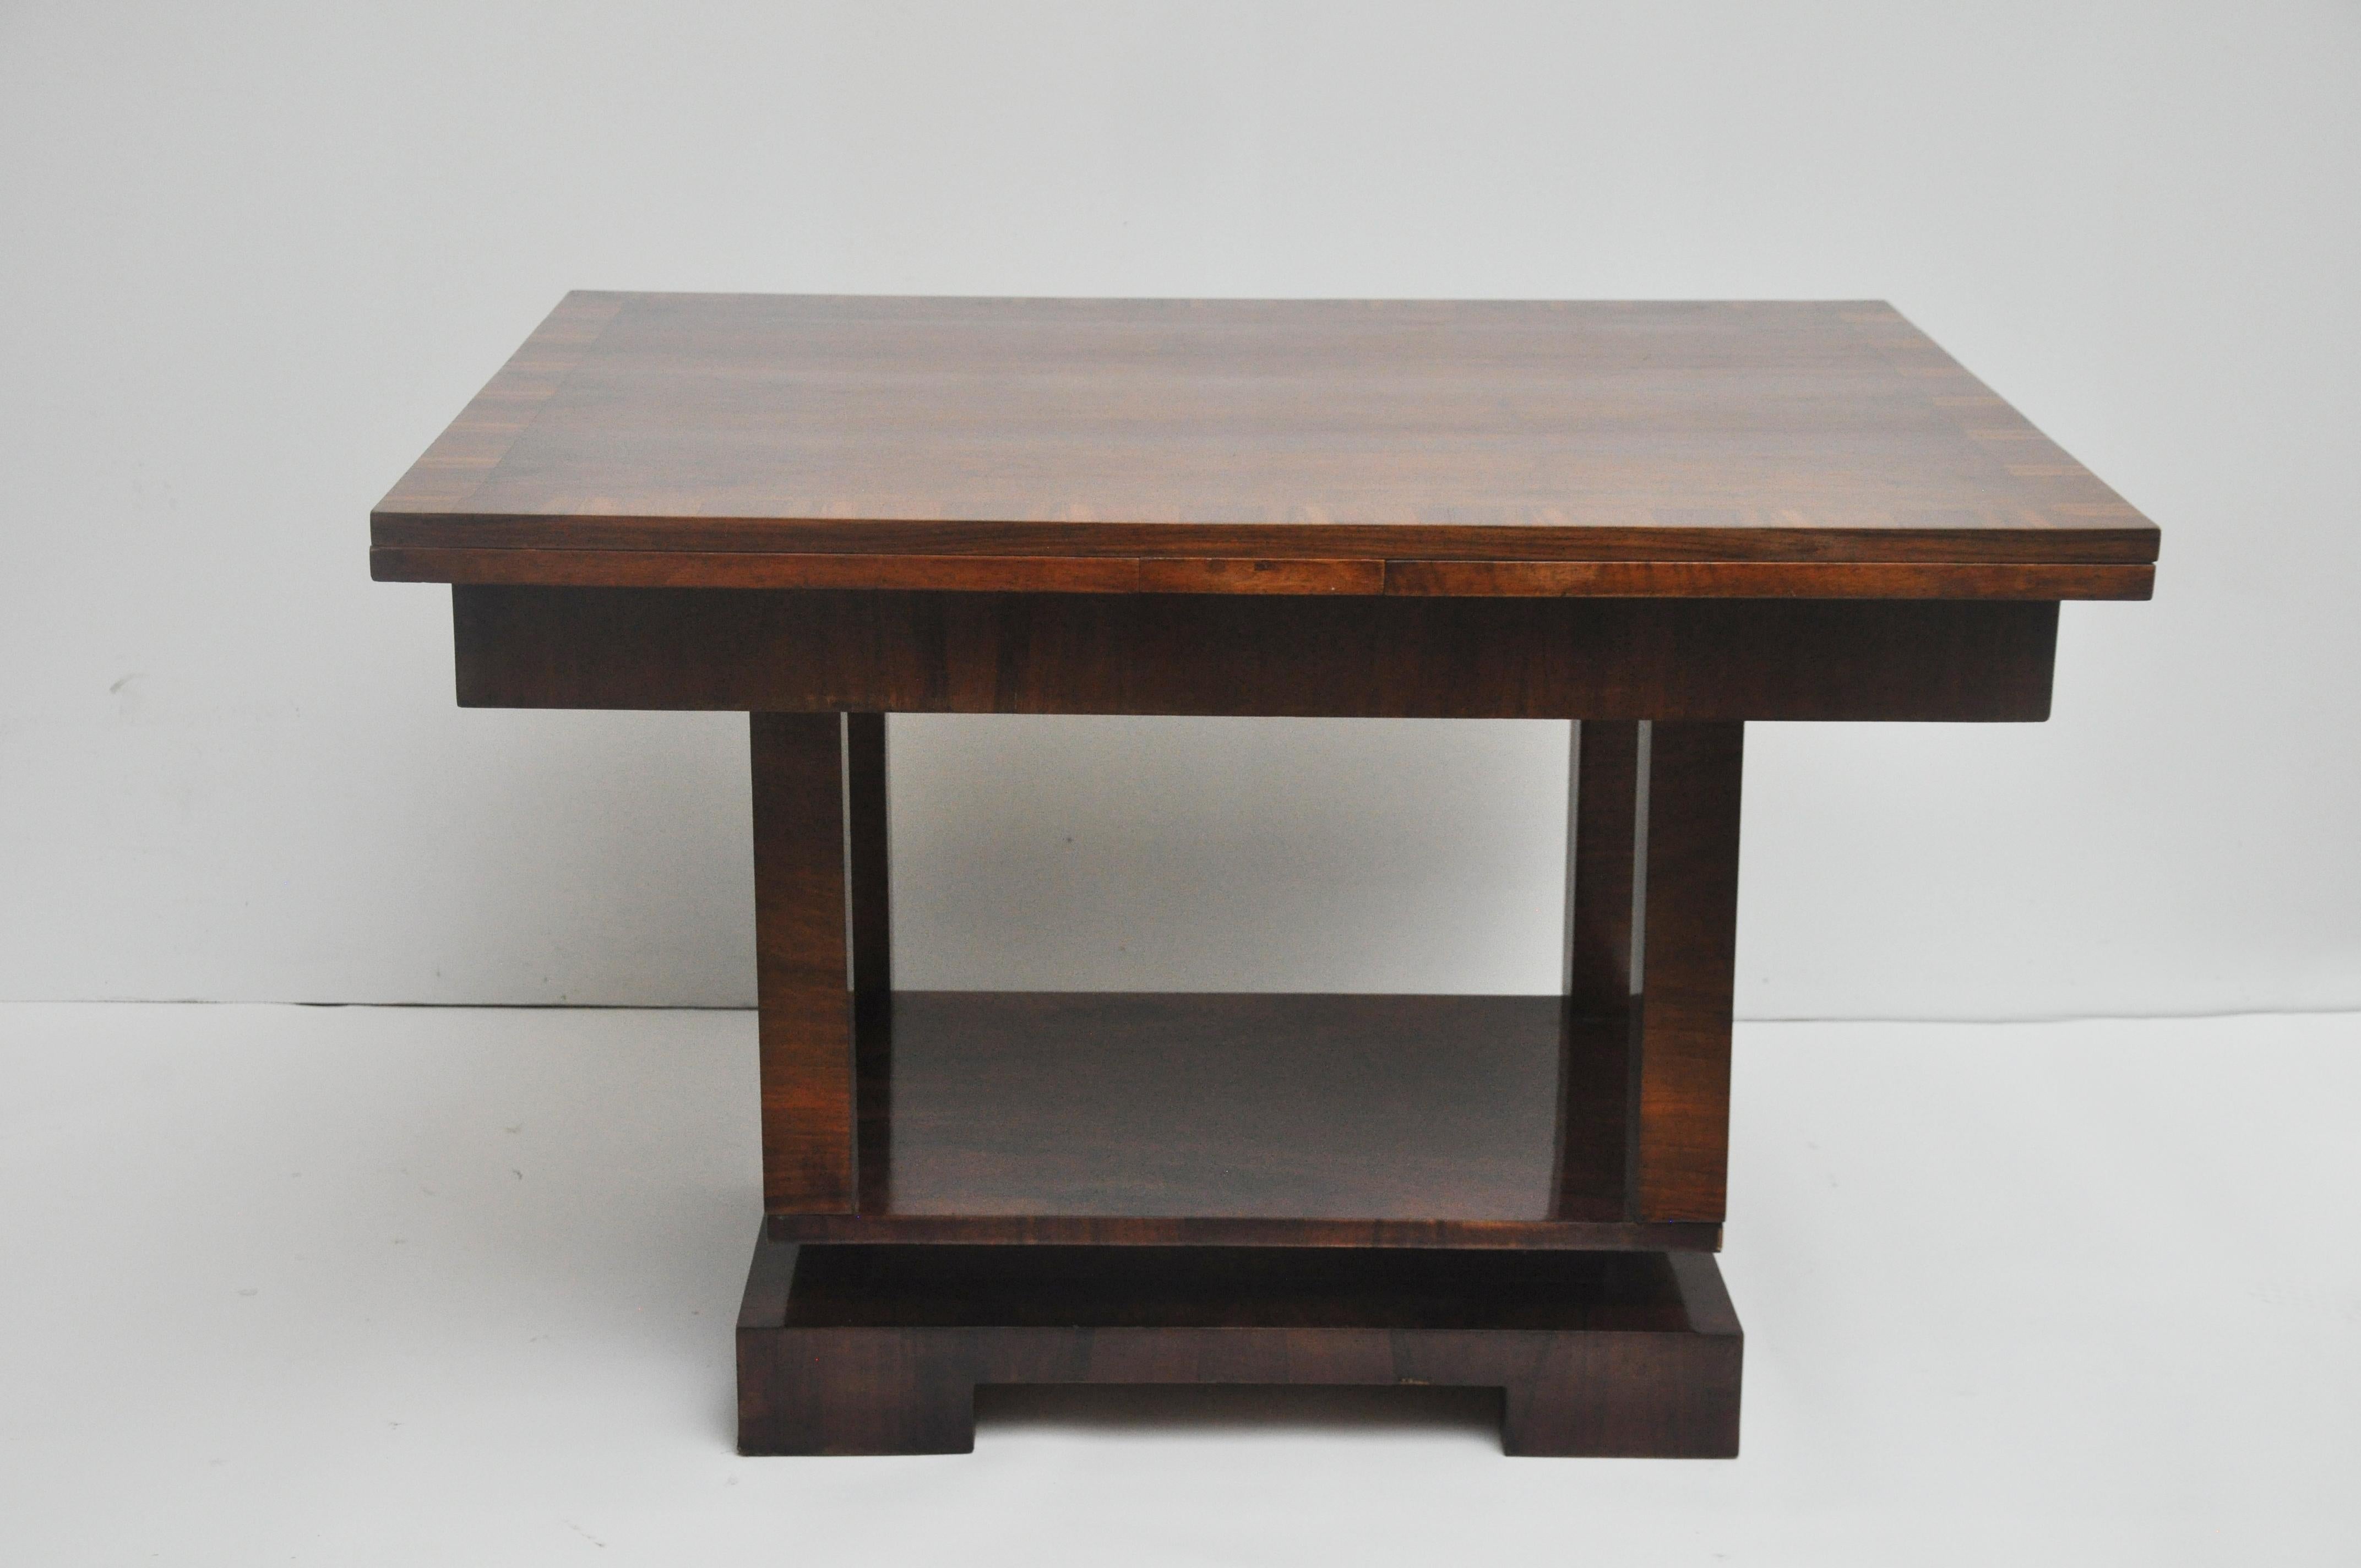 This Deco style extension table opens to 87.5